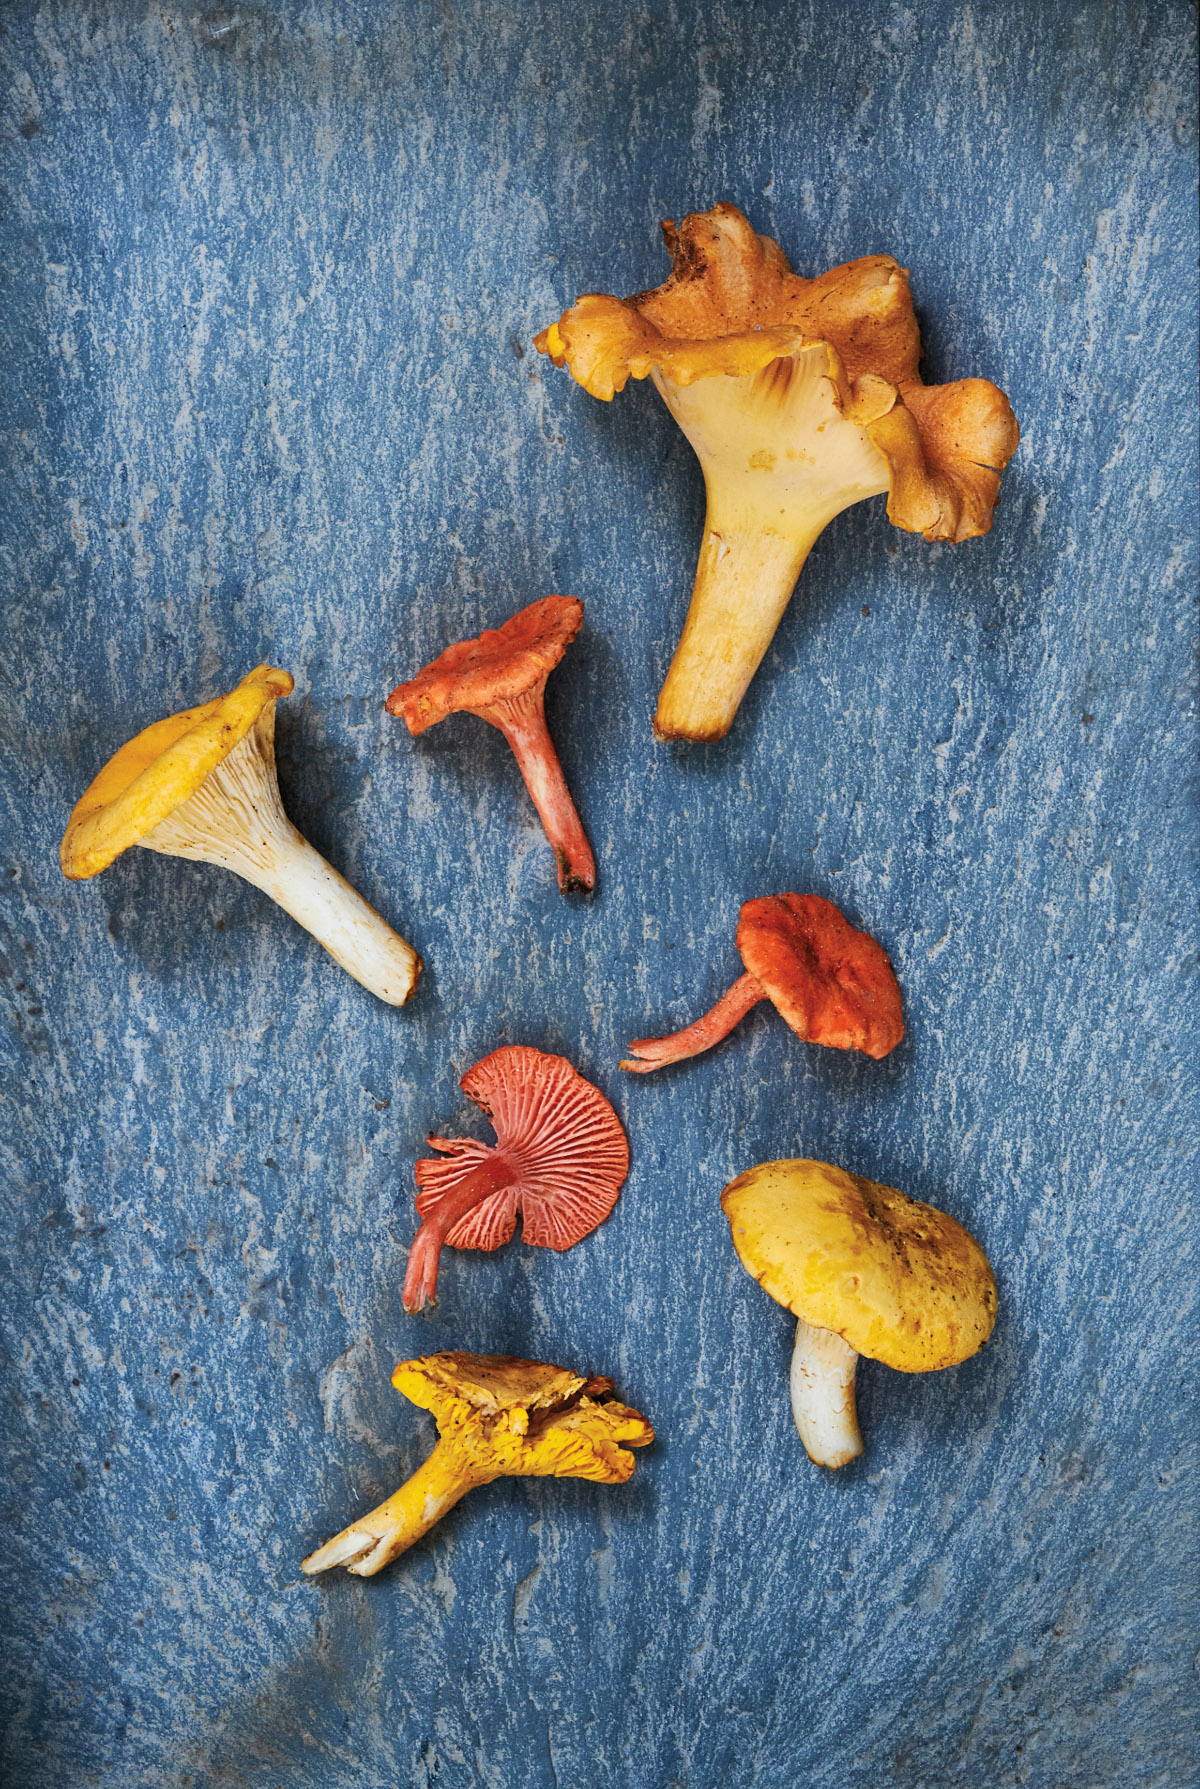 Yellow, orange and red mushrooms on a blue background, all found in Davy Crockett National Forest